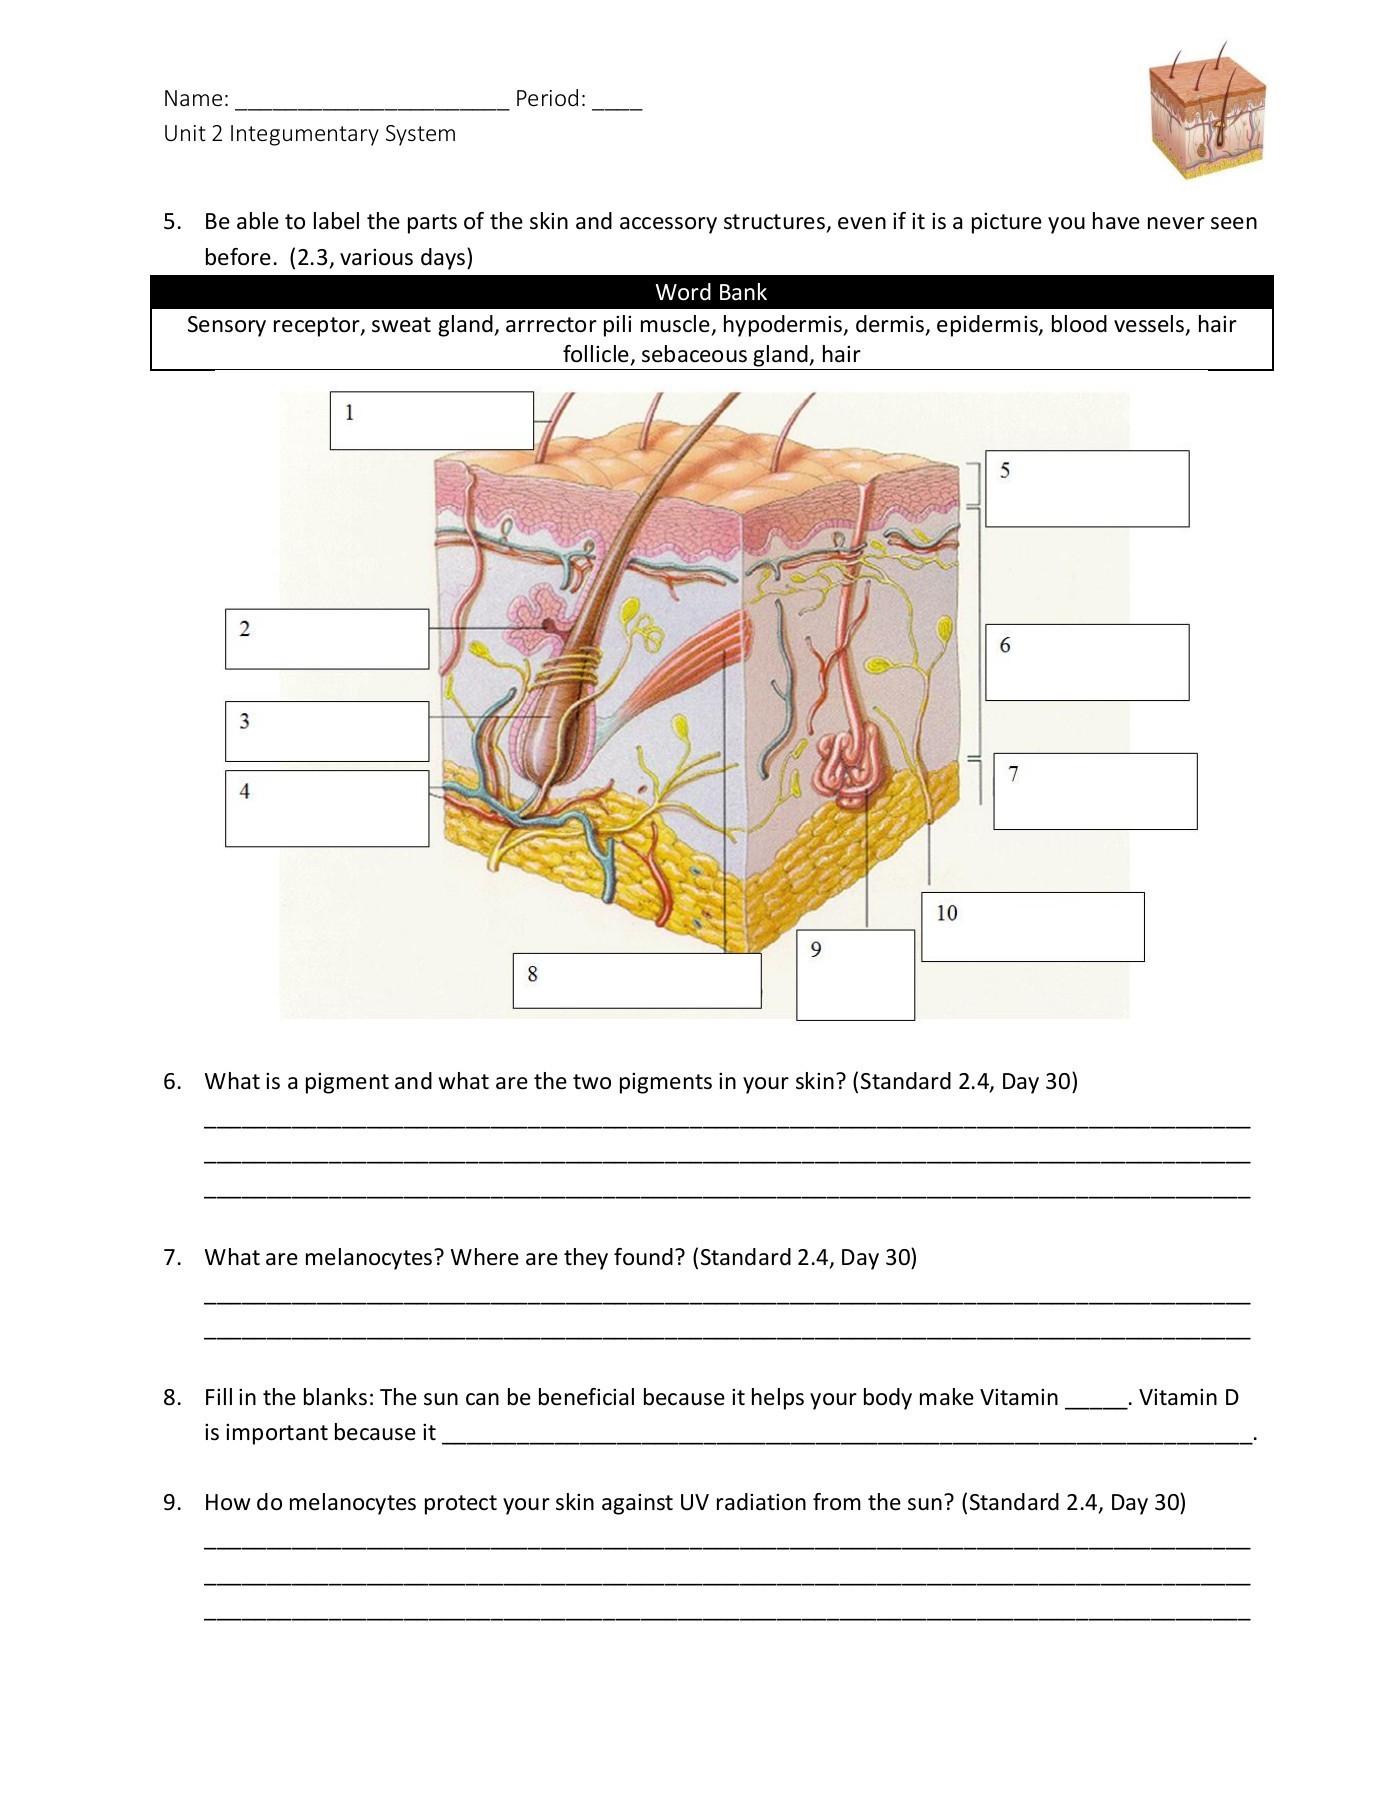 Integumentary System Worksheet Answers Name Period Unit 2 Integumentary System Unit 2 Study Guide